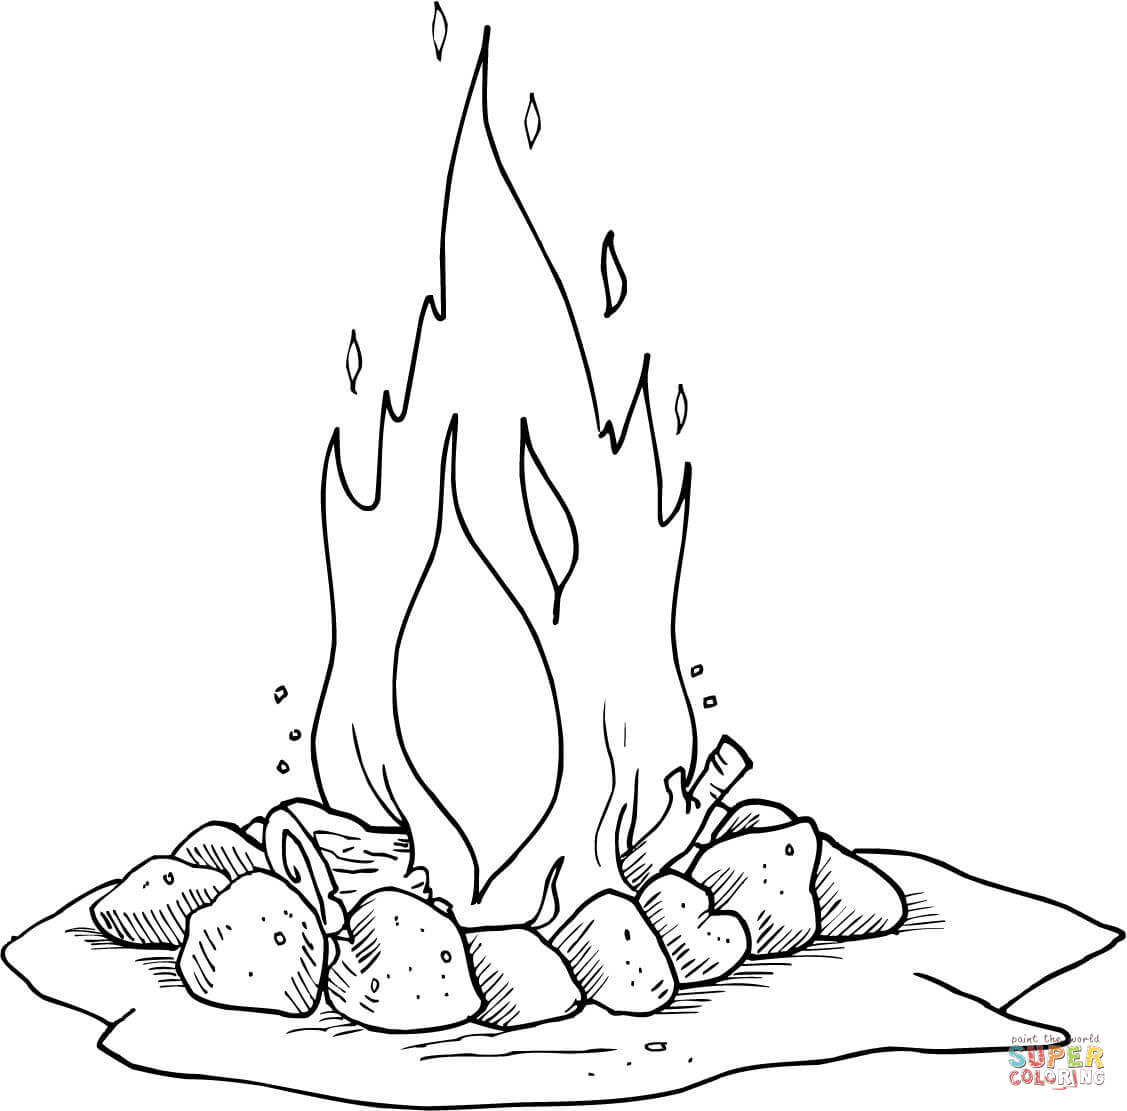 Campfire coloring page | Free Printable Coloring Pages